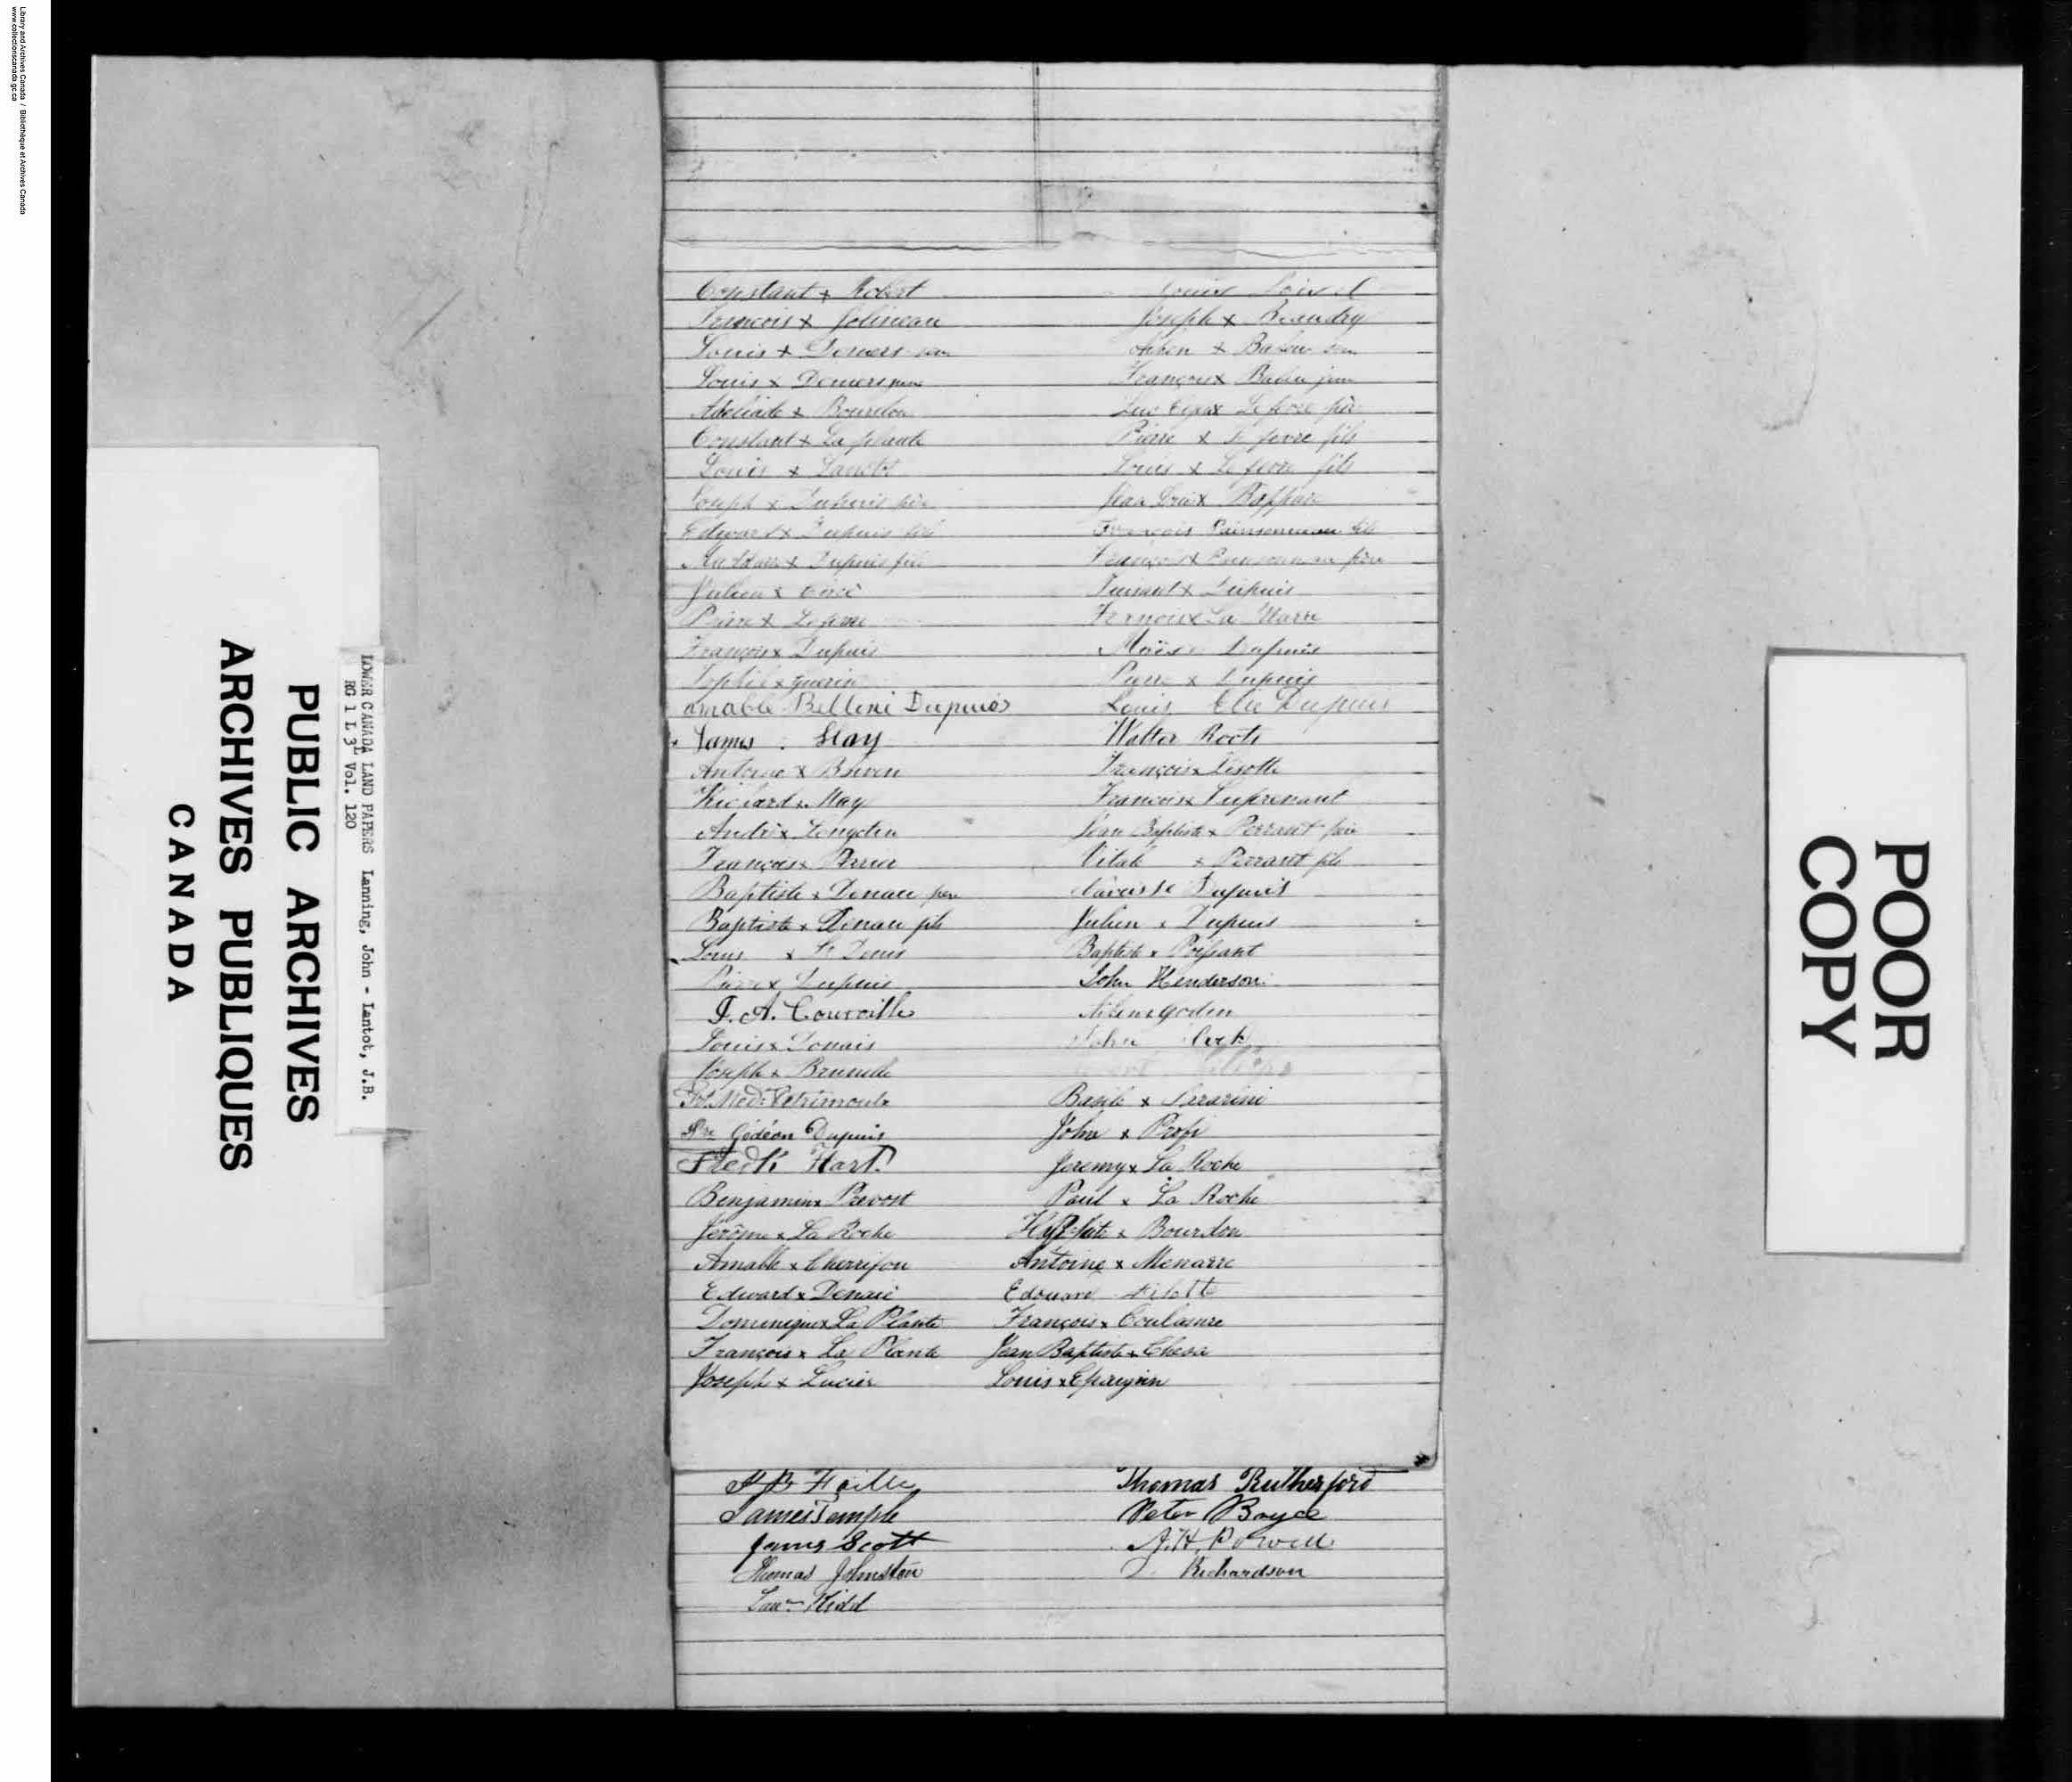 Digitized page of  for Image No.: e008703489